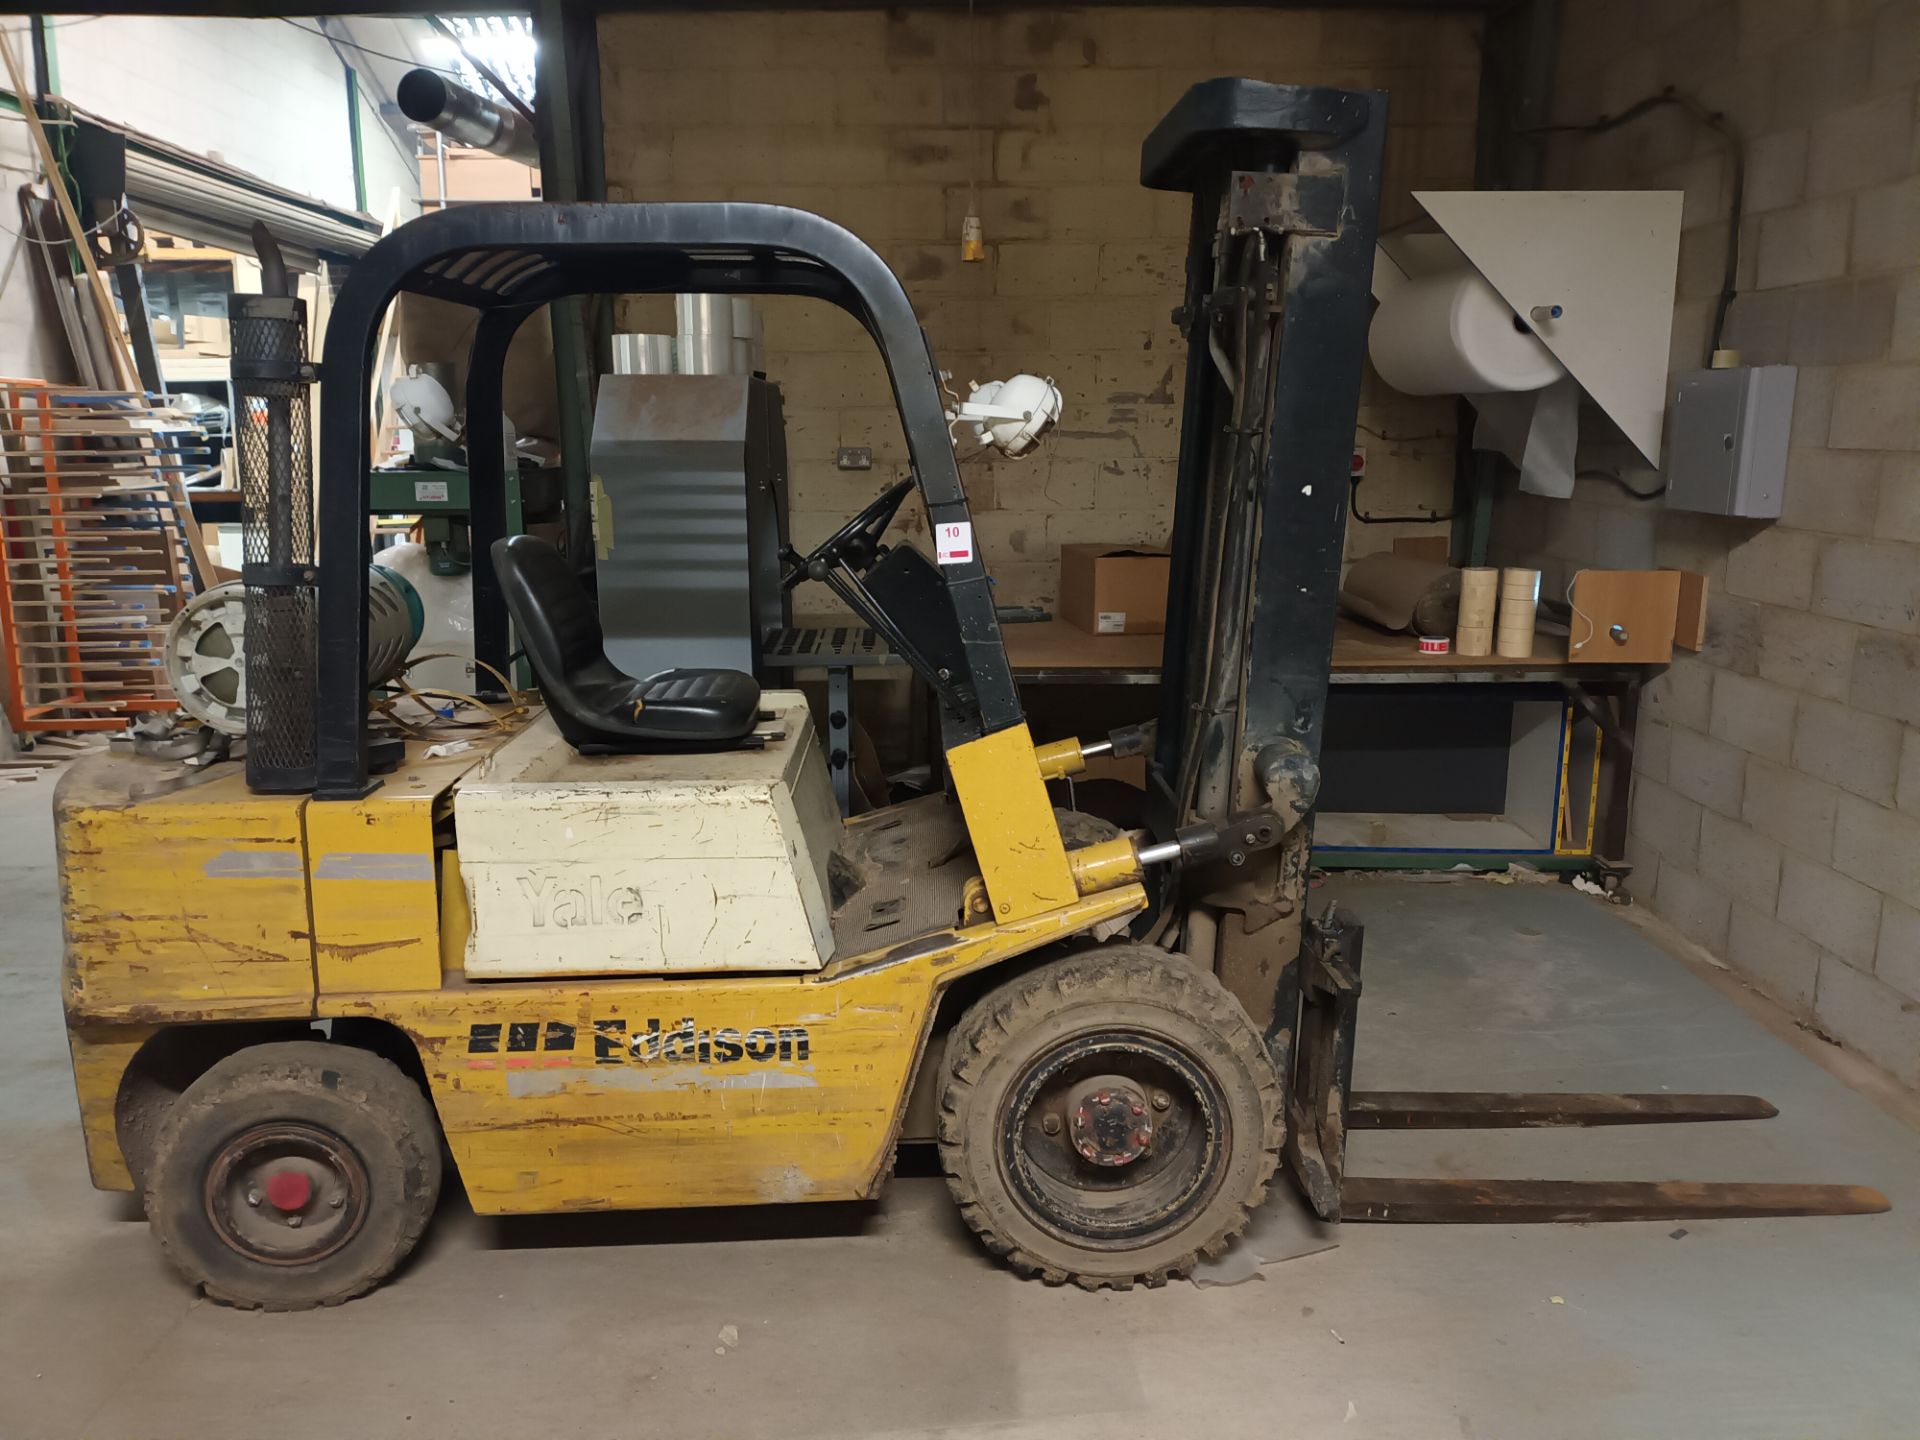 Yale Eddison GLP060RCT2286 LPG forklift truck (1985) with 1554 hours